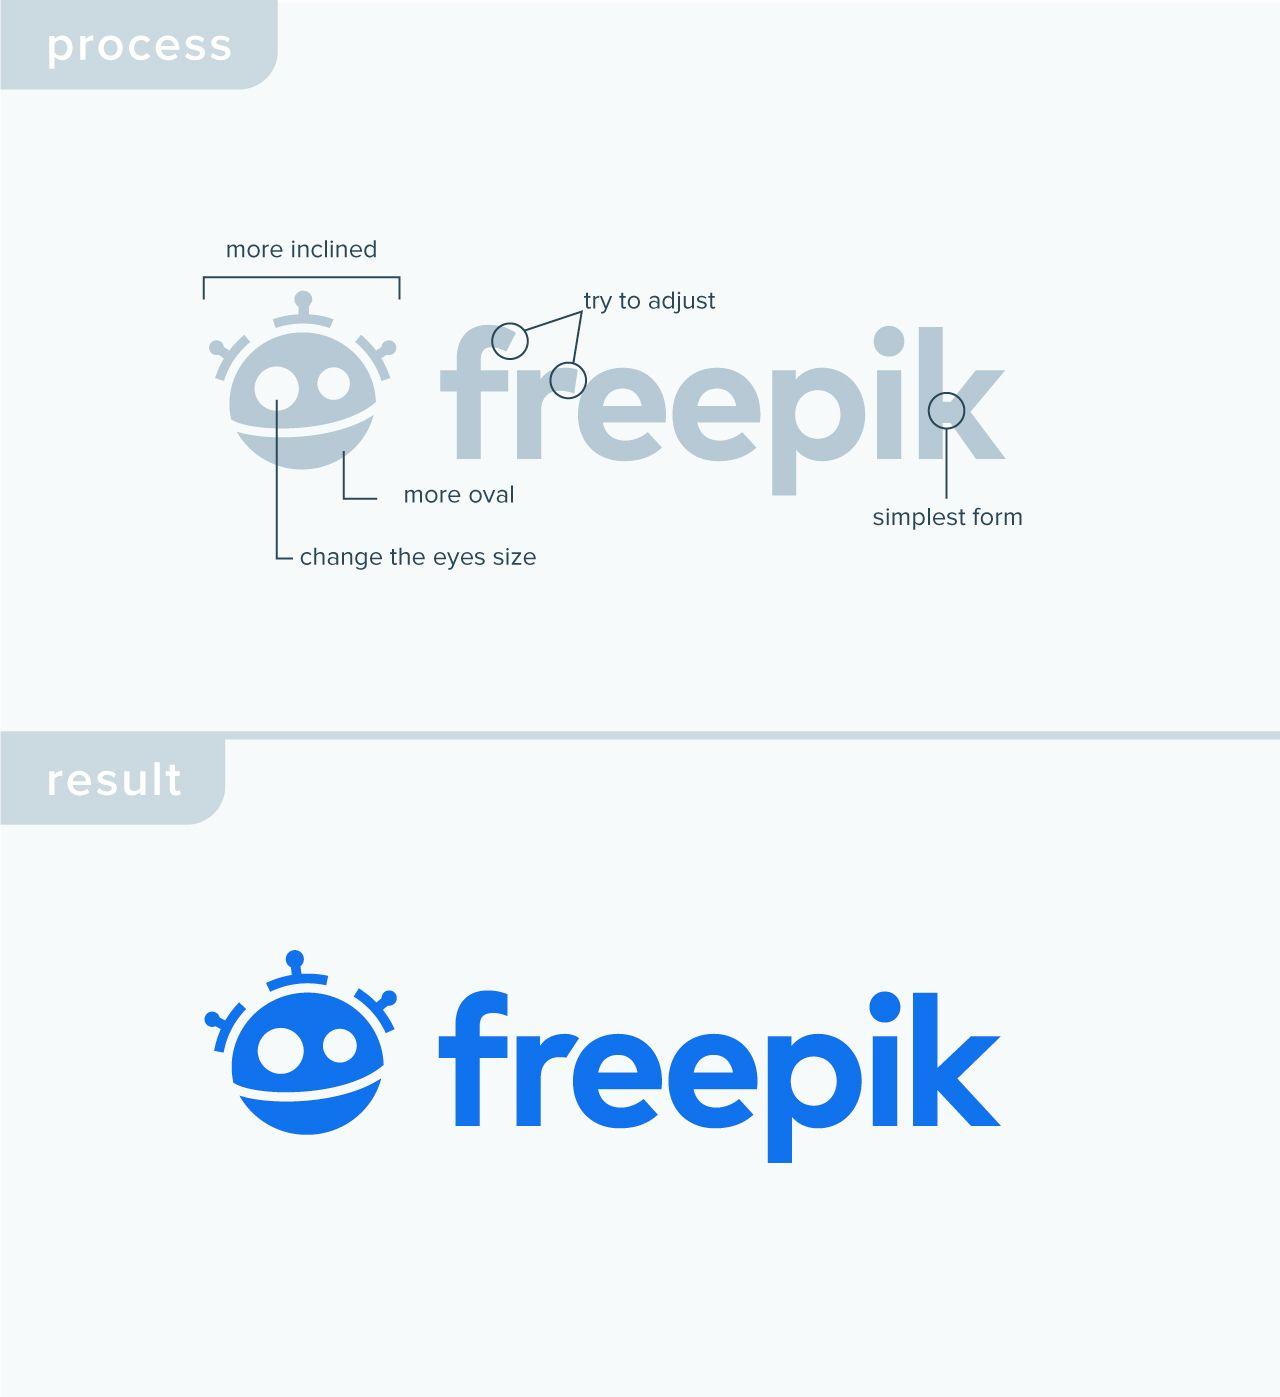 Structure Logo - Freepik changes its visual identity and presents the new logo